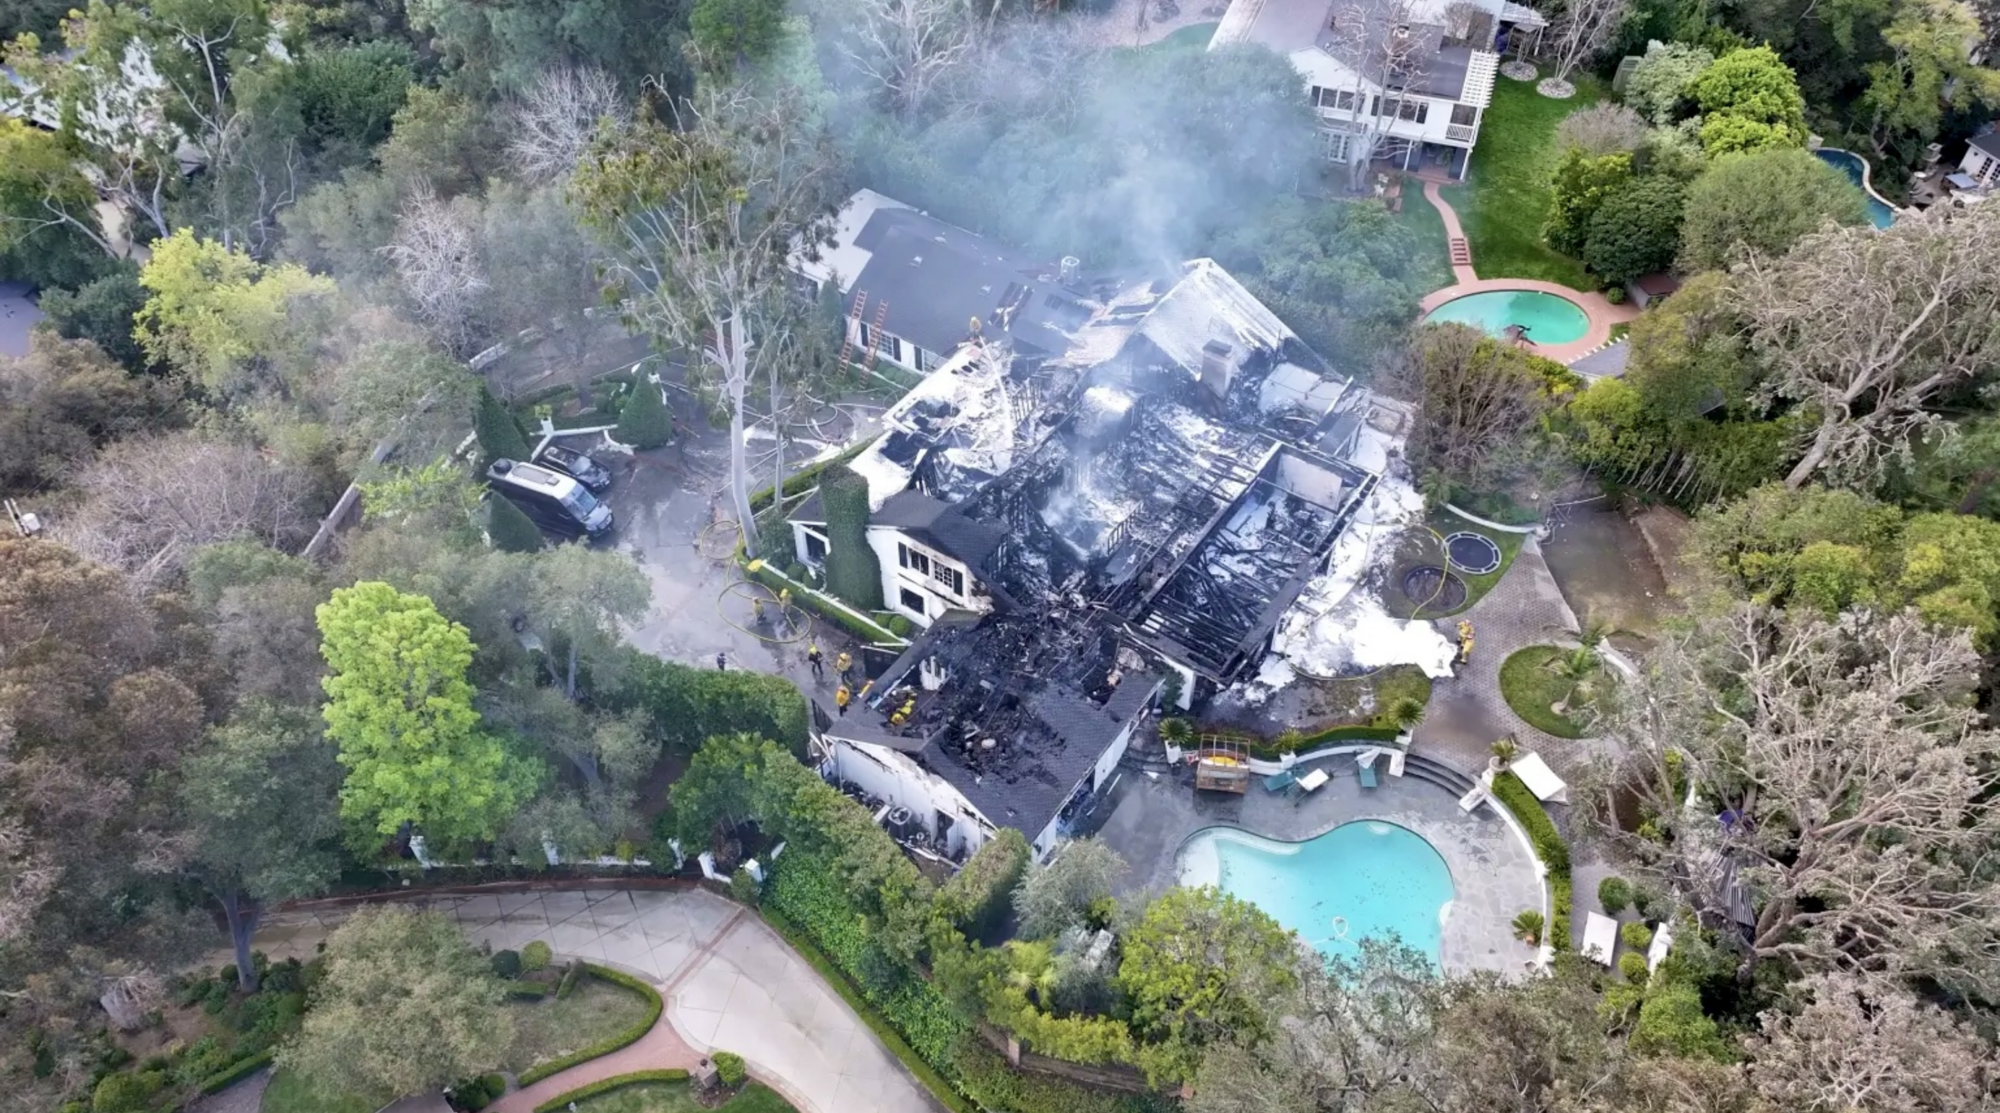 The fabulous $7 million estate of famous model and actress Cara Delevigne burns to the ground: what it looked like before and after the fire